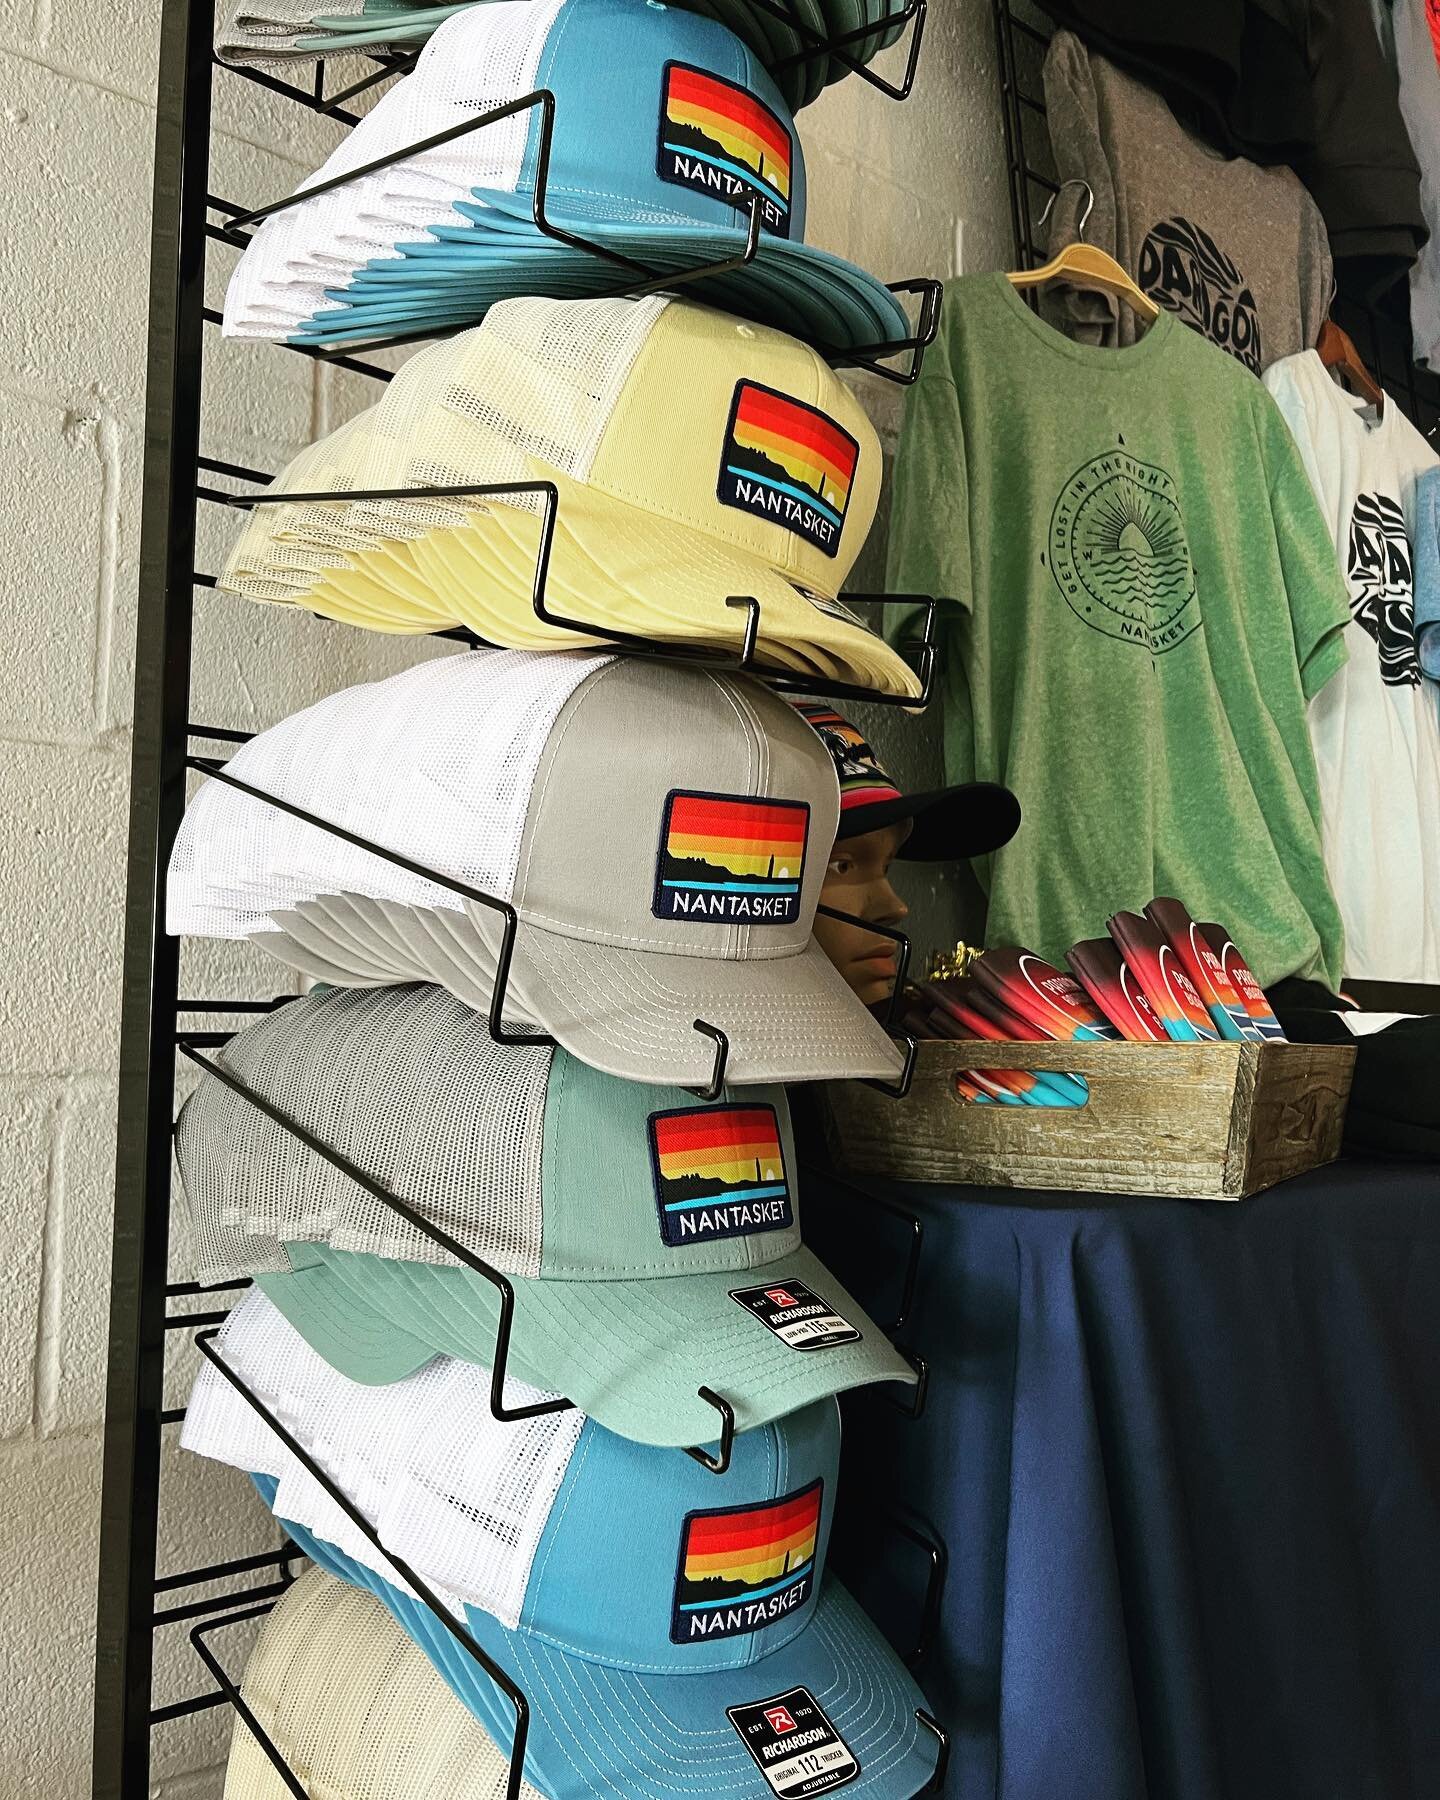 NEW MERCH🍻🧢😎

The wait is over&hellip; we&rsquo;ve got our Nantasket hats back in three fun new colors! We&rsquo;ve also got new T-shirts, sweatshirts, and coozies! GET LOST IN THE RIGHT DIRECTION🧭☀️

Hats-$30
T-Shirts- $30
Long sleeve T-Shirt- $